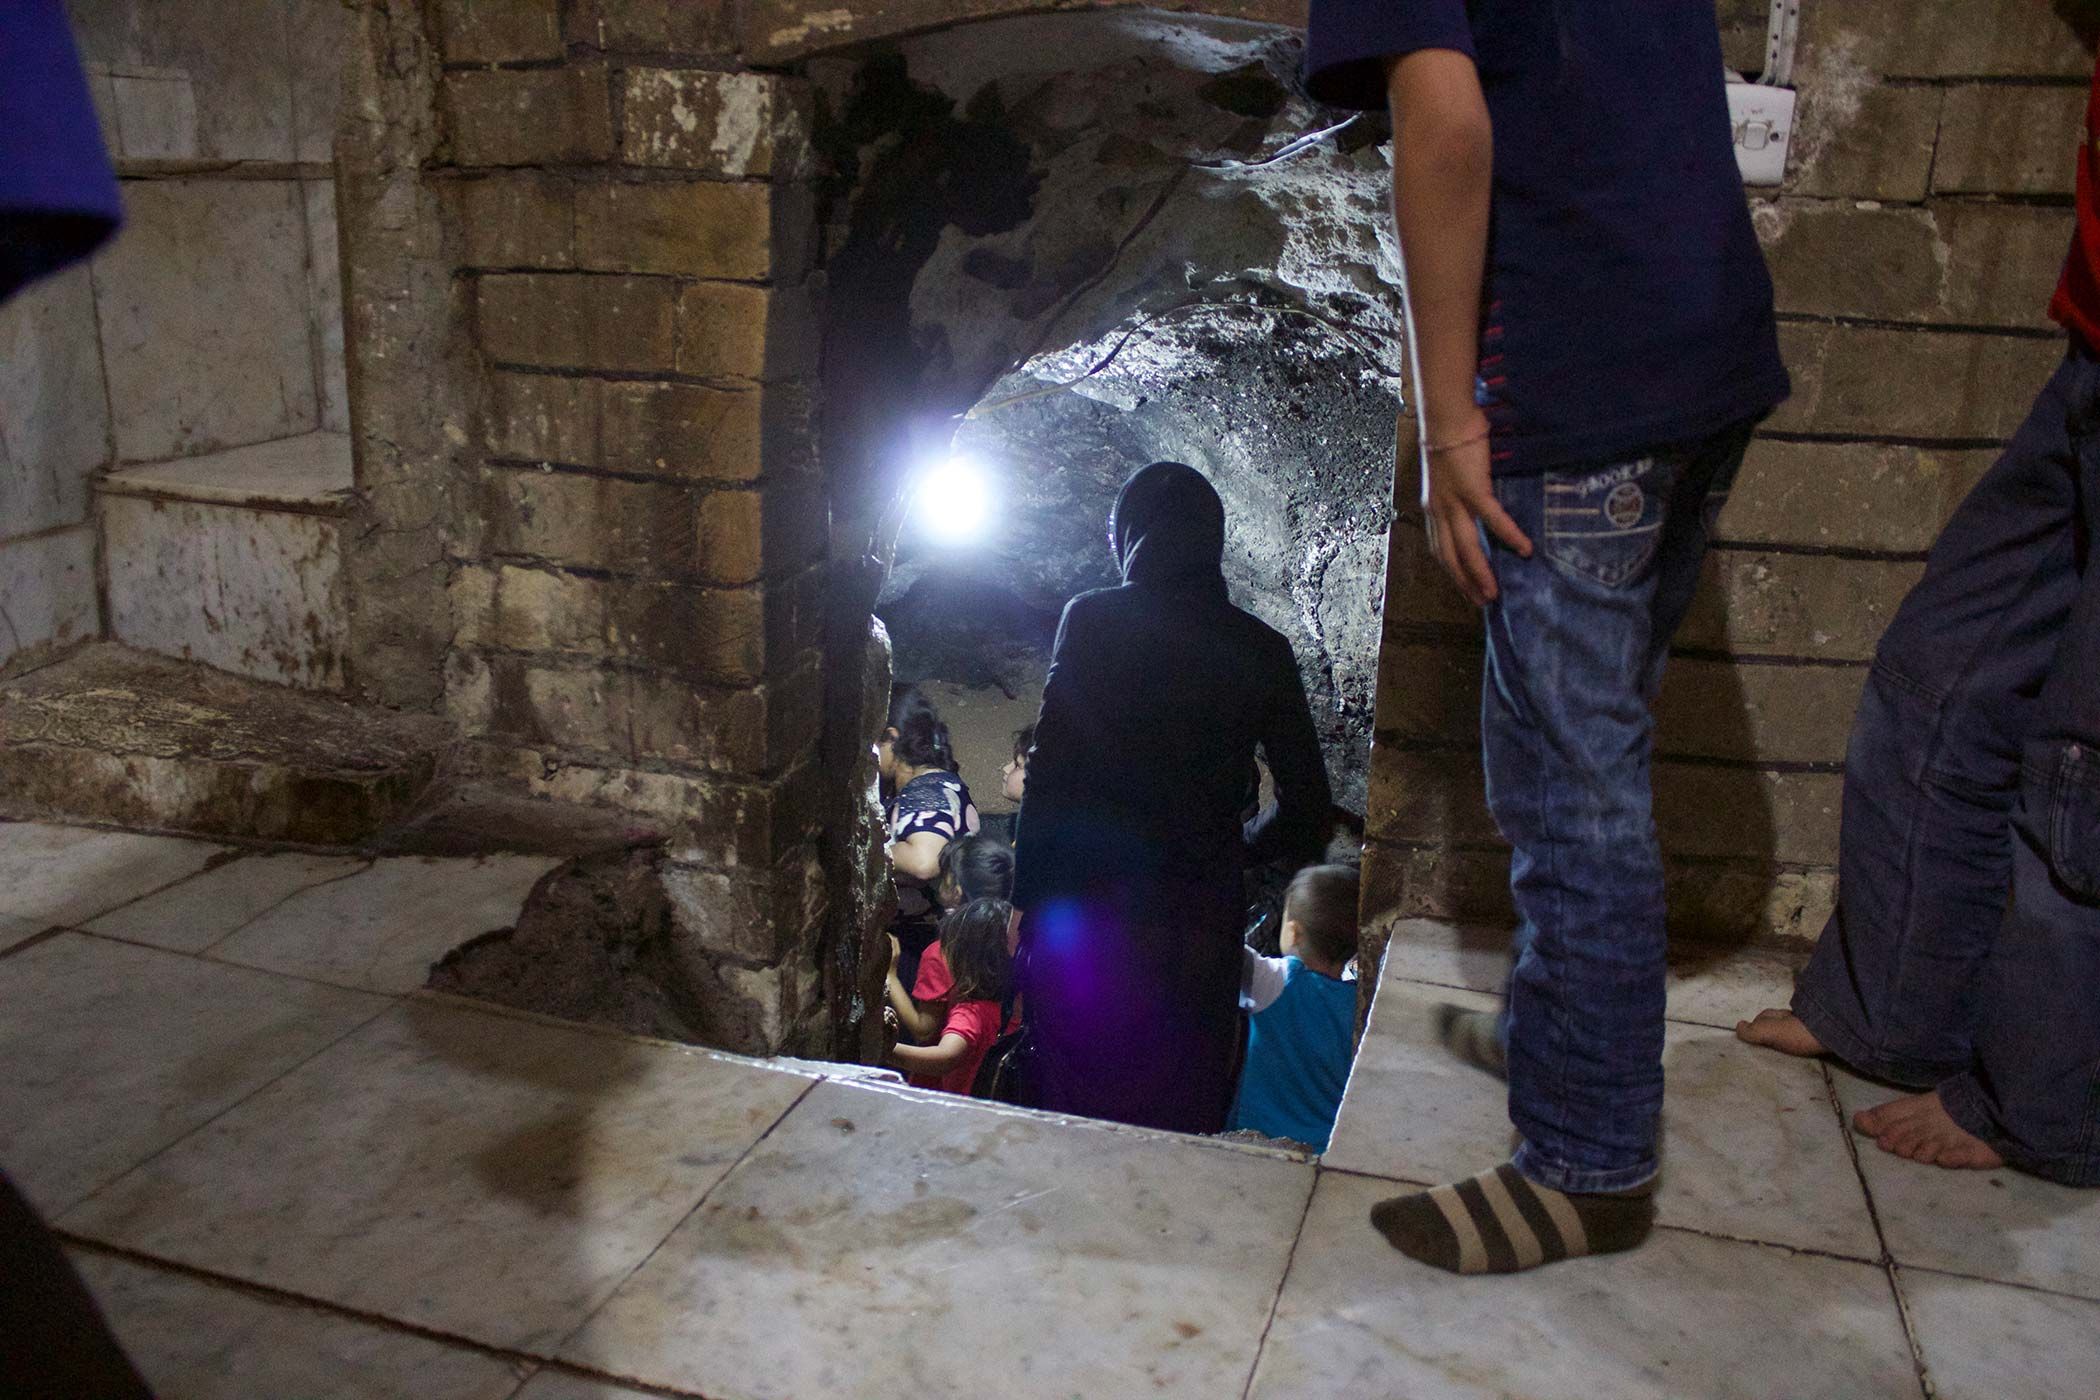 Participants in the refugee program descended a stairwell in the Yazidi sanctuary at Lalish to access a spring of holy water. Image by Emily Feldman. Iraq, 2015.